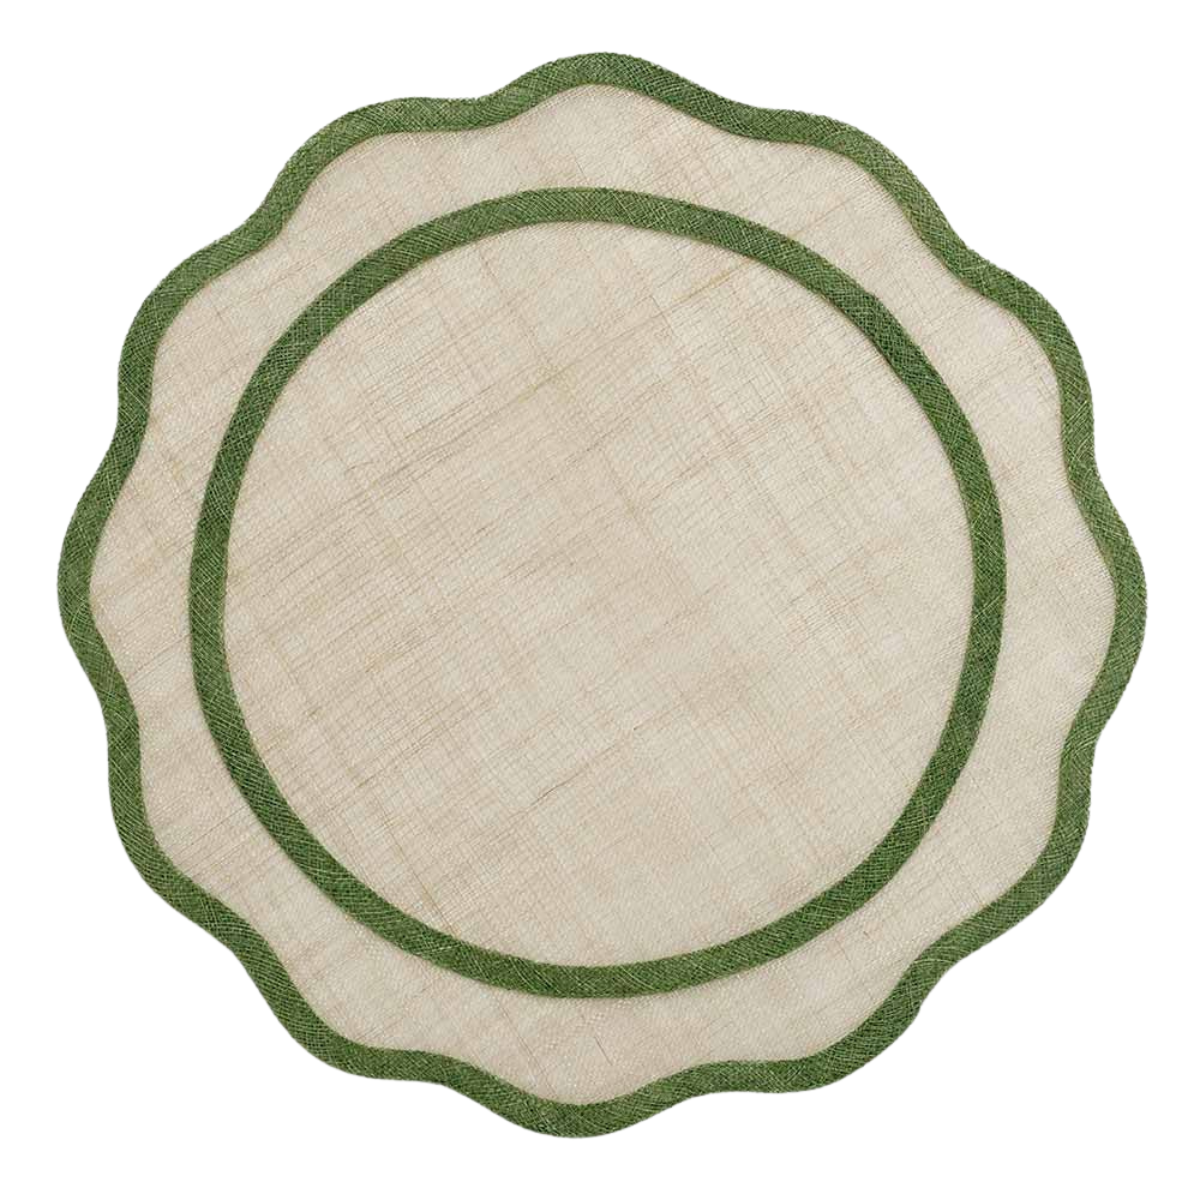 Pomegranate Green Scalloped Placemat - Set of 4